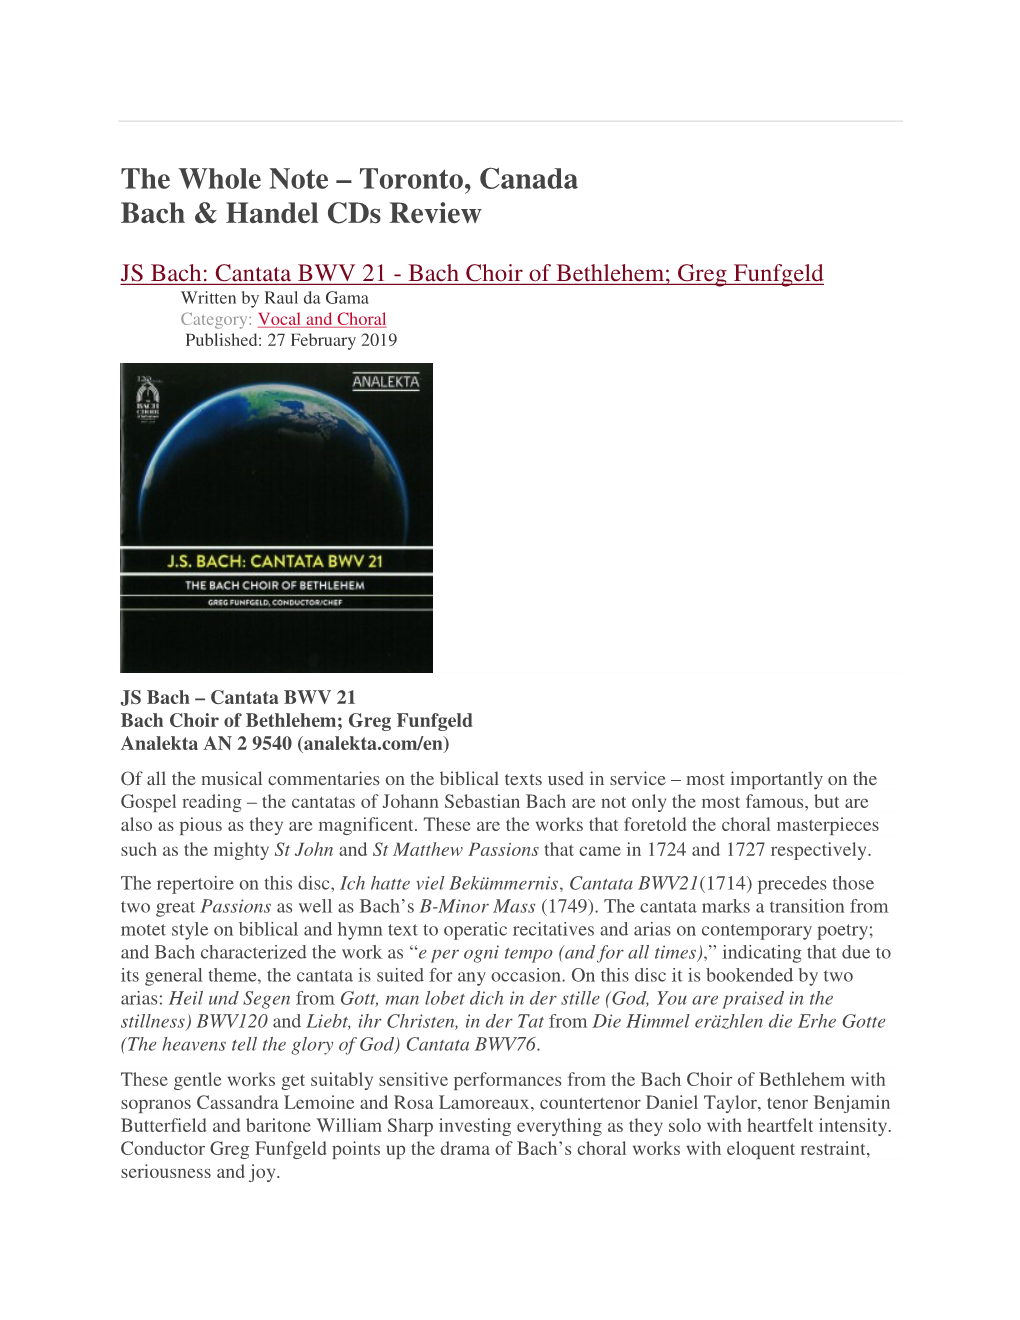 The Whole Note – Toronto, Canada Bach & Handel Cds Review